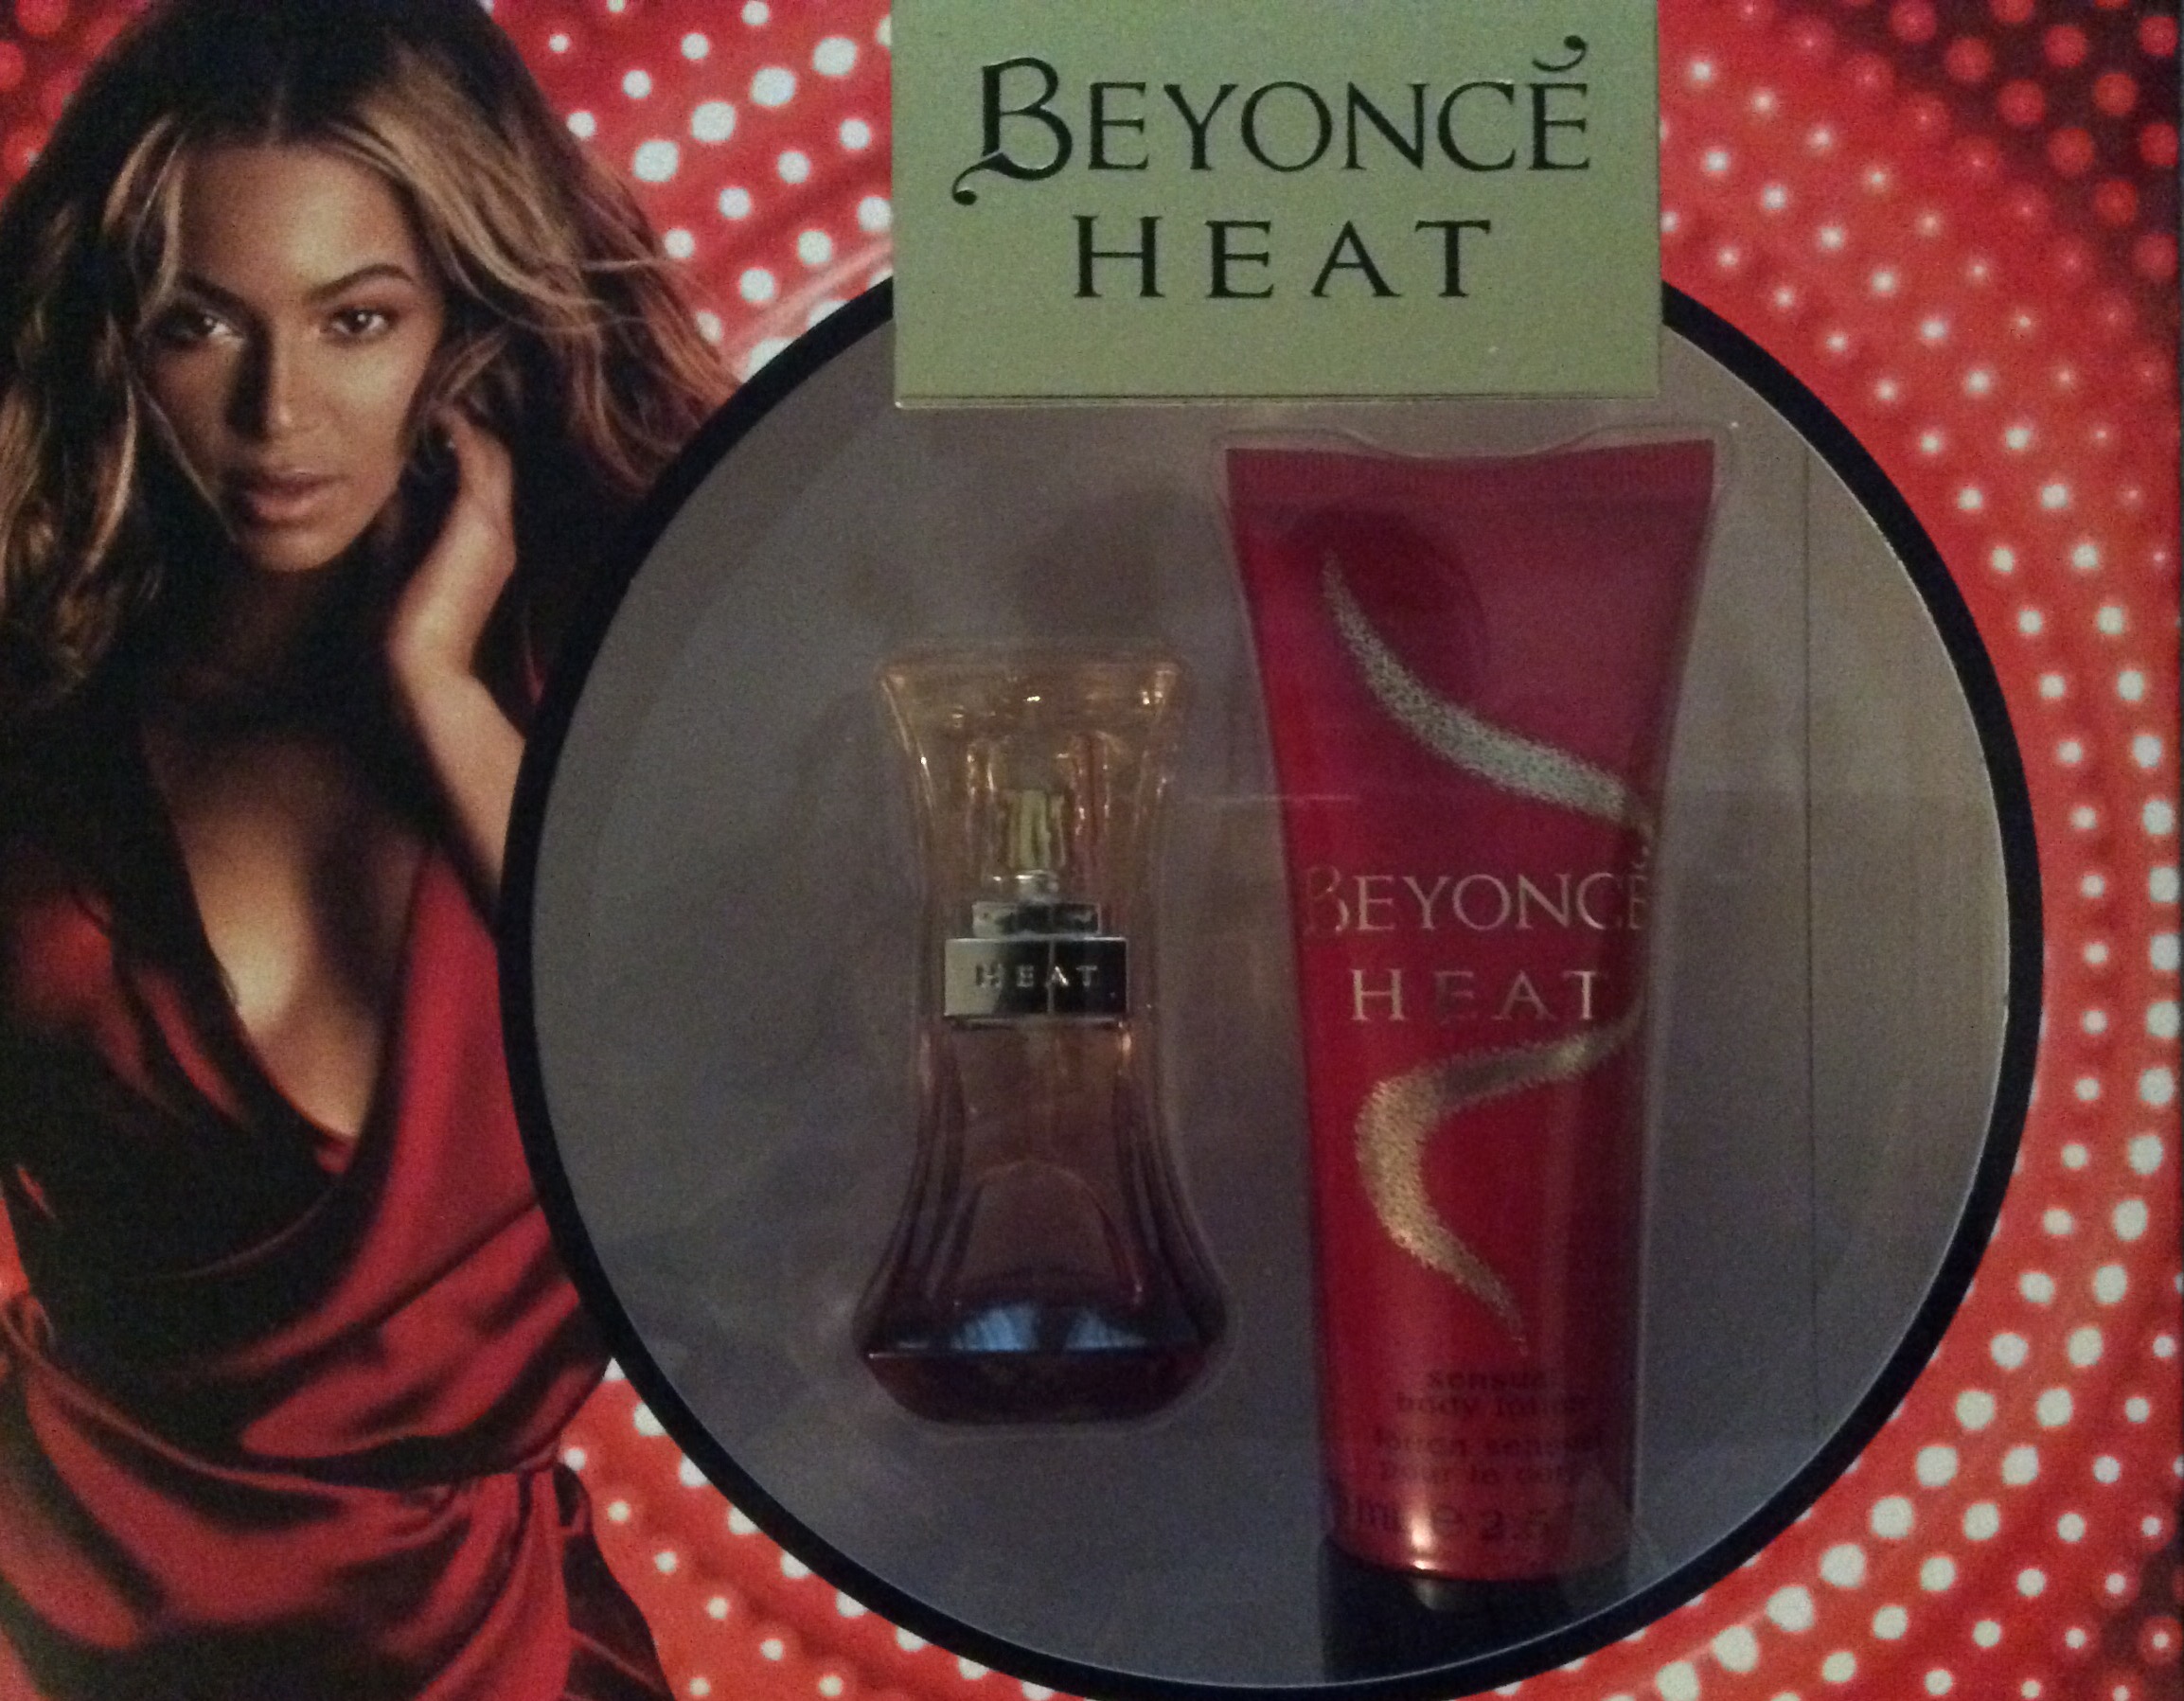 Win 1 of 2 Beyonce Gift Package